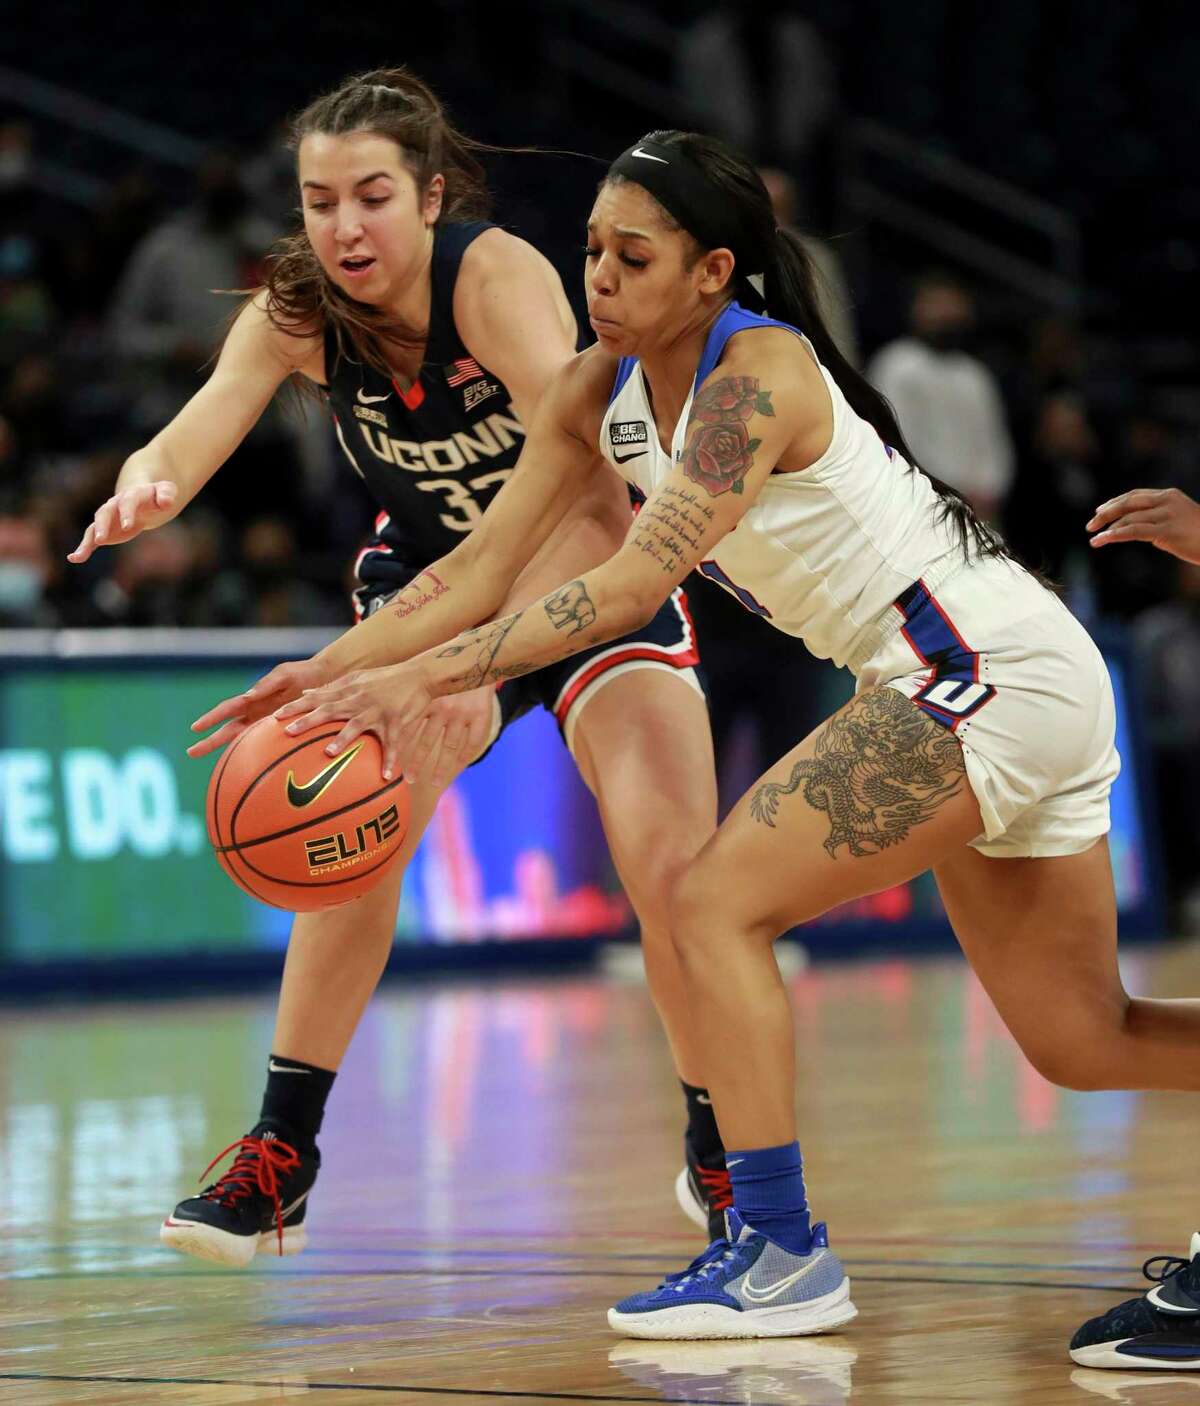 Connecticut guard Caroline Ducharme (33) and DePaul guard Sonya Morris reach for a loose ball in the first half of an NCAA college basketball game at Wintrust Arena in Chicago on Wednesday, Jan. 26, 2022. (Chris Sweda/Chicago Tribune via AP)